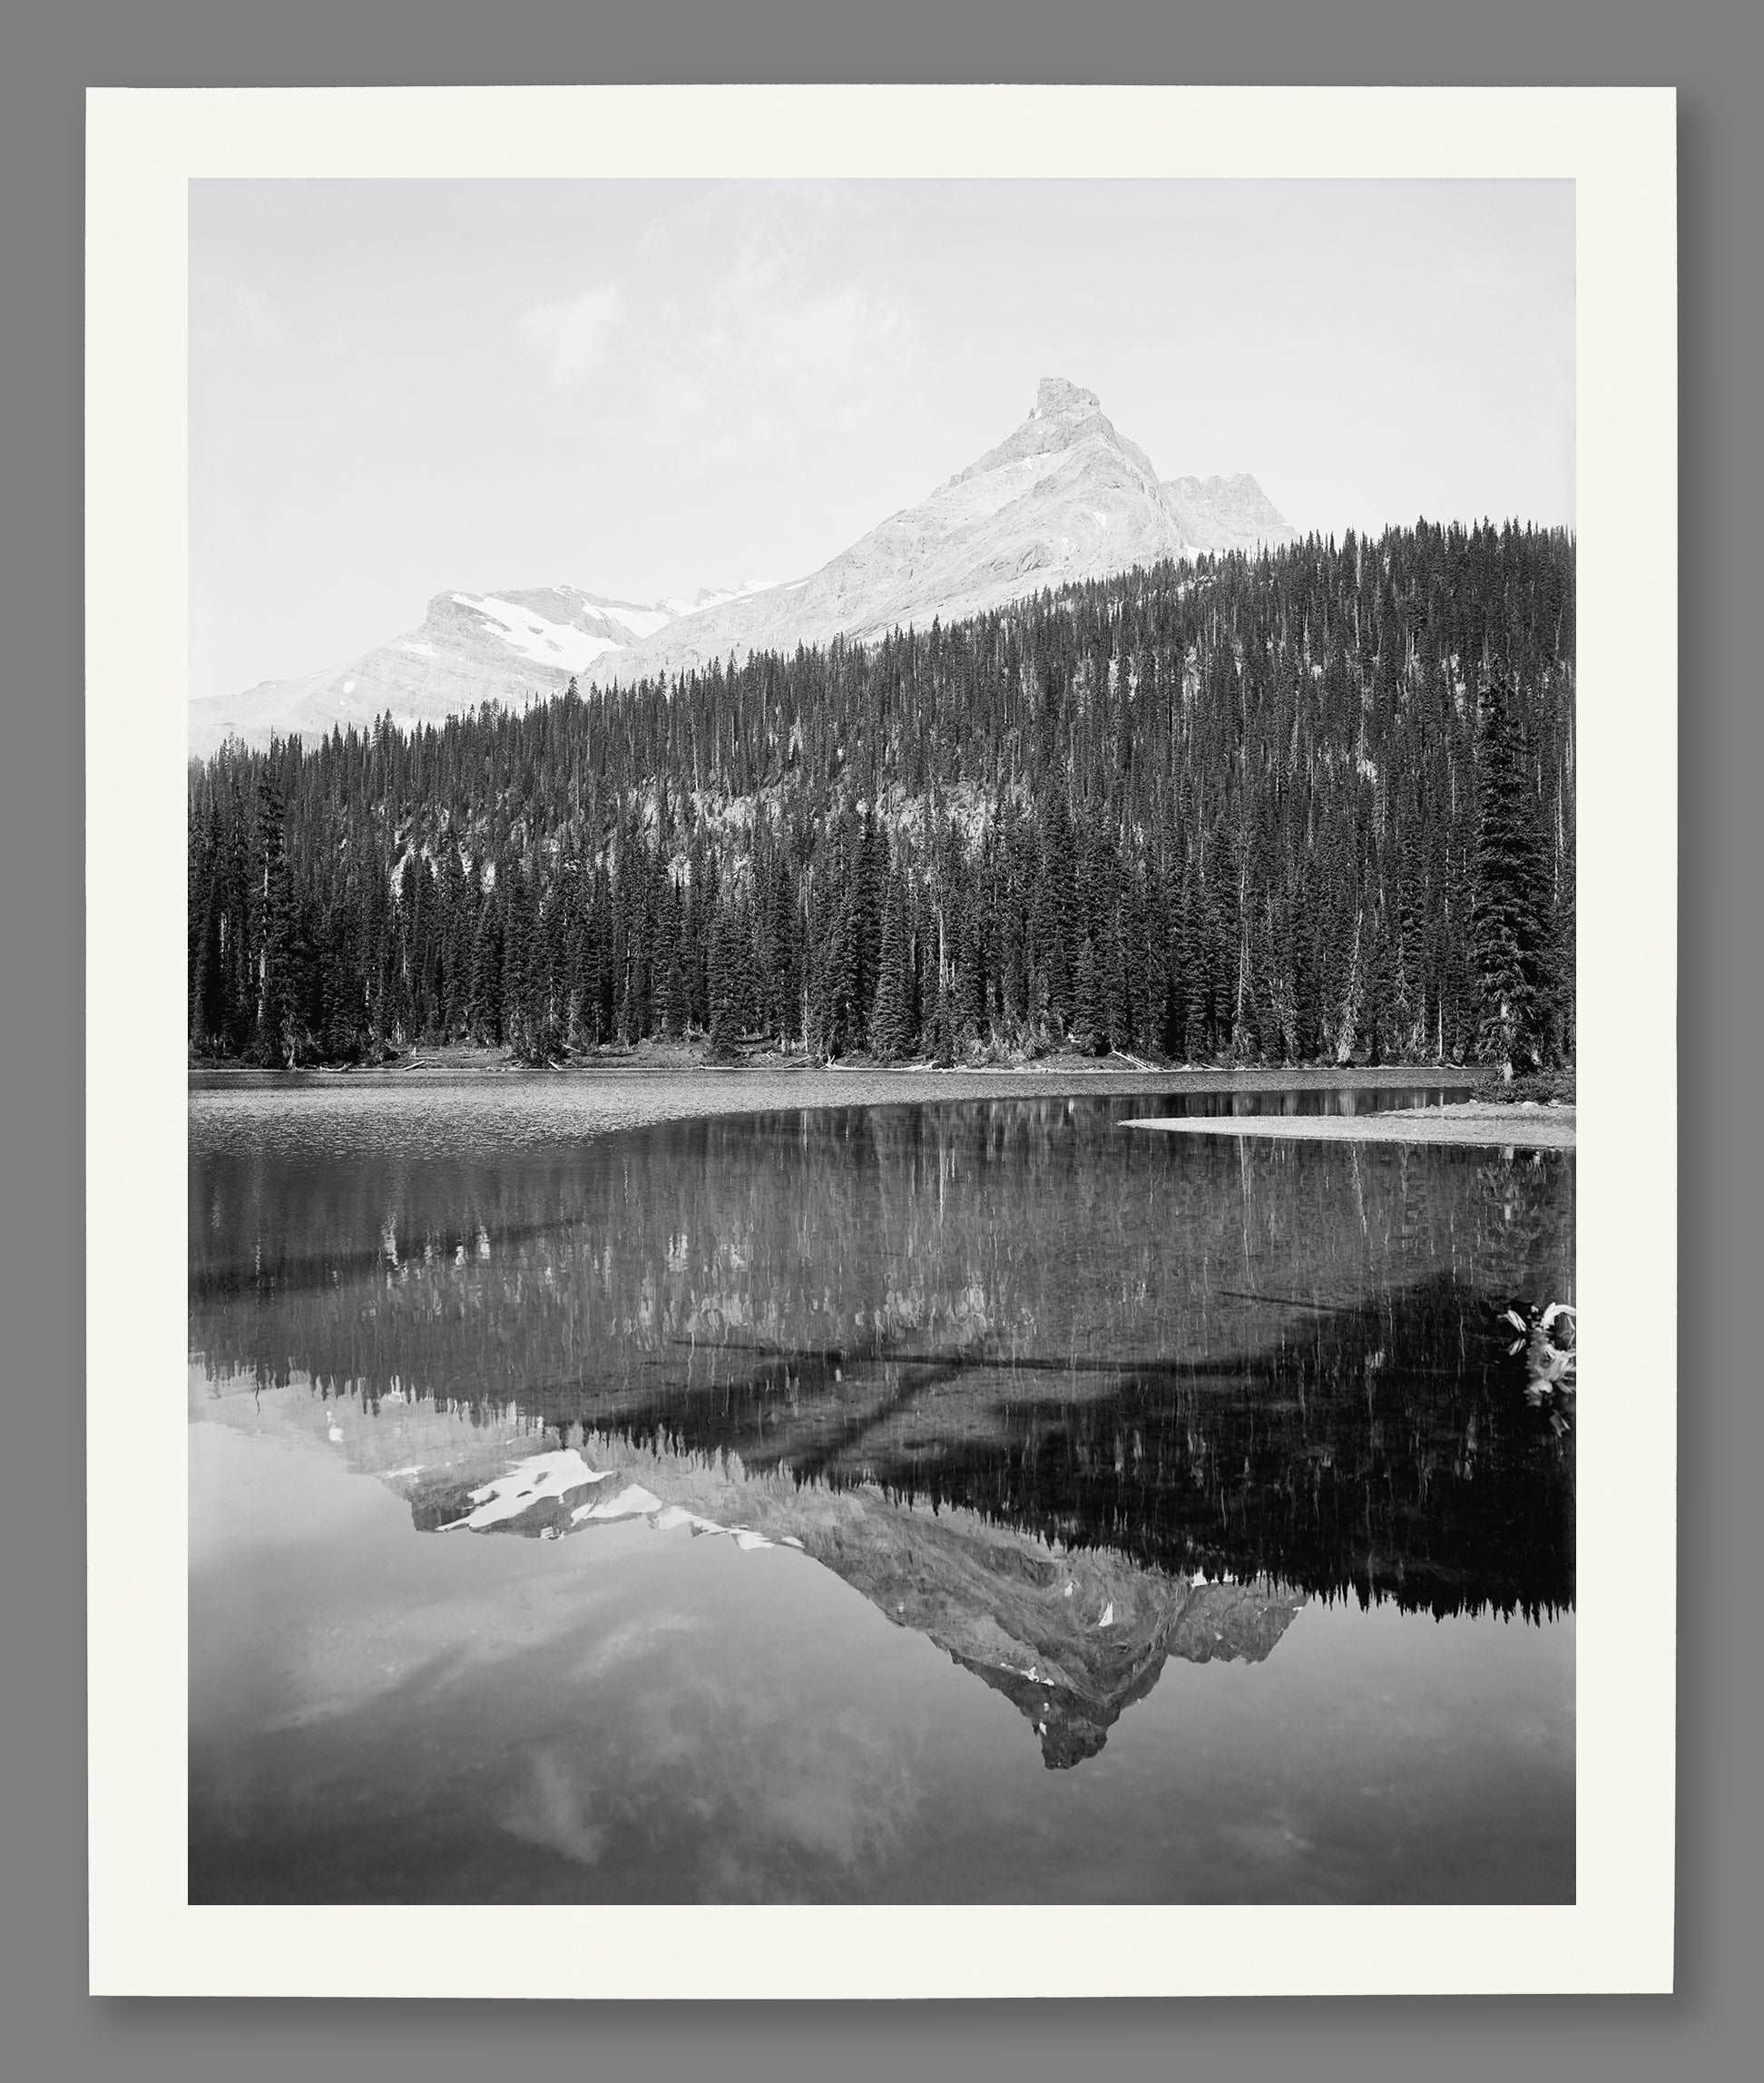 A fine art paper print of a black and white image of Yoho Park's Summit Lake